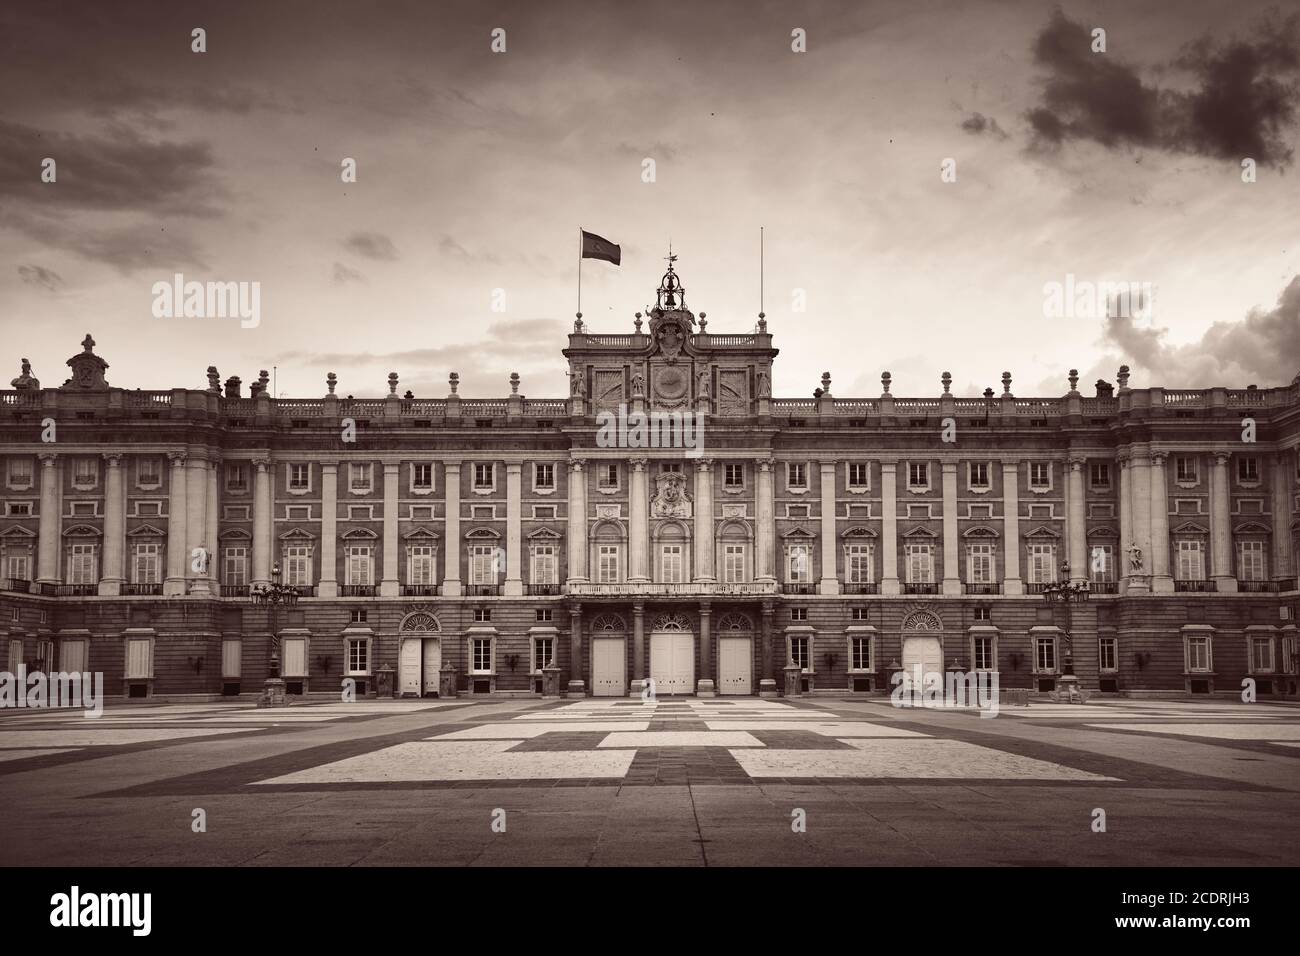 Royal Palace historical building closeup view in Madrid Spain. Stock Photo